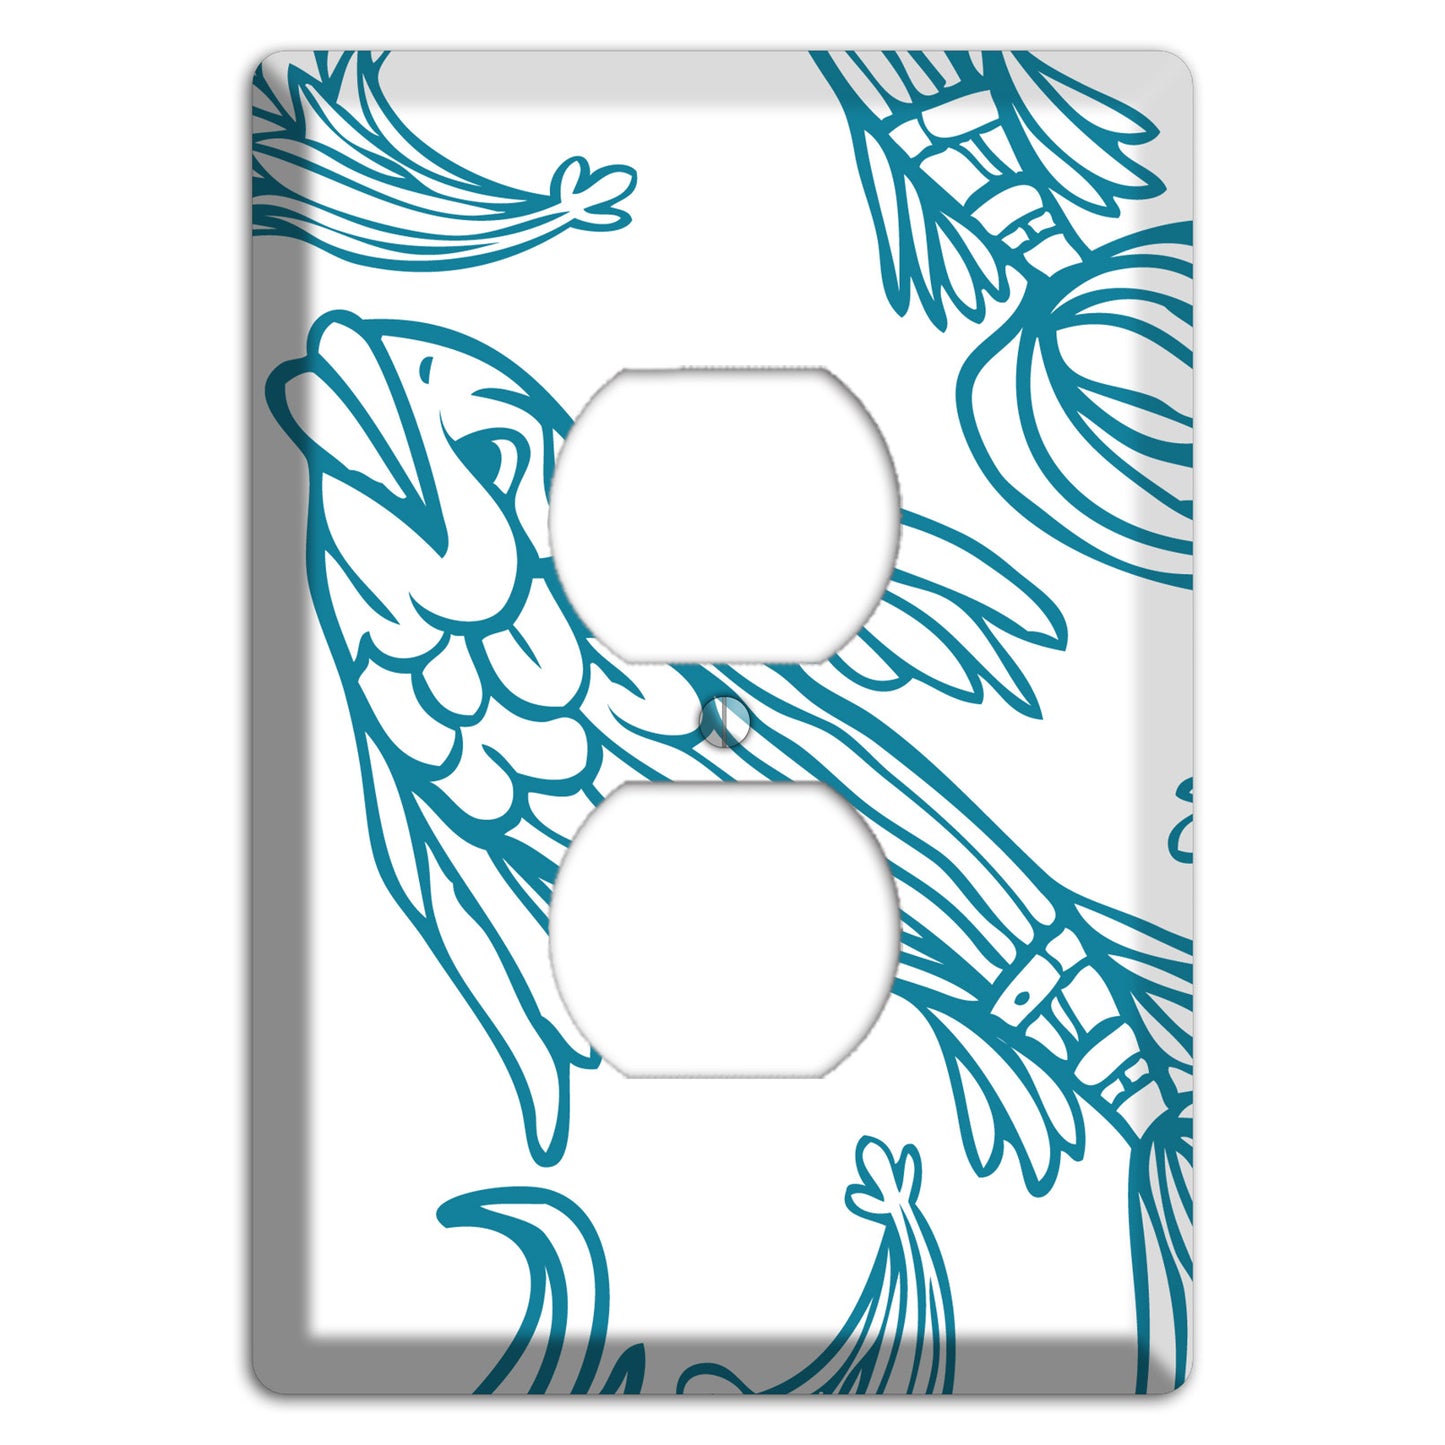 Teal and White Koi Duplex Outlet Wallplate